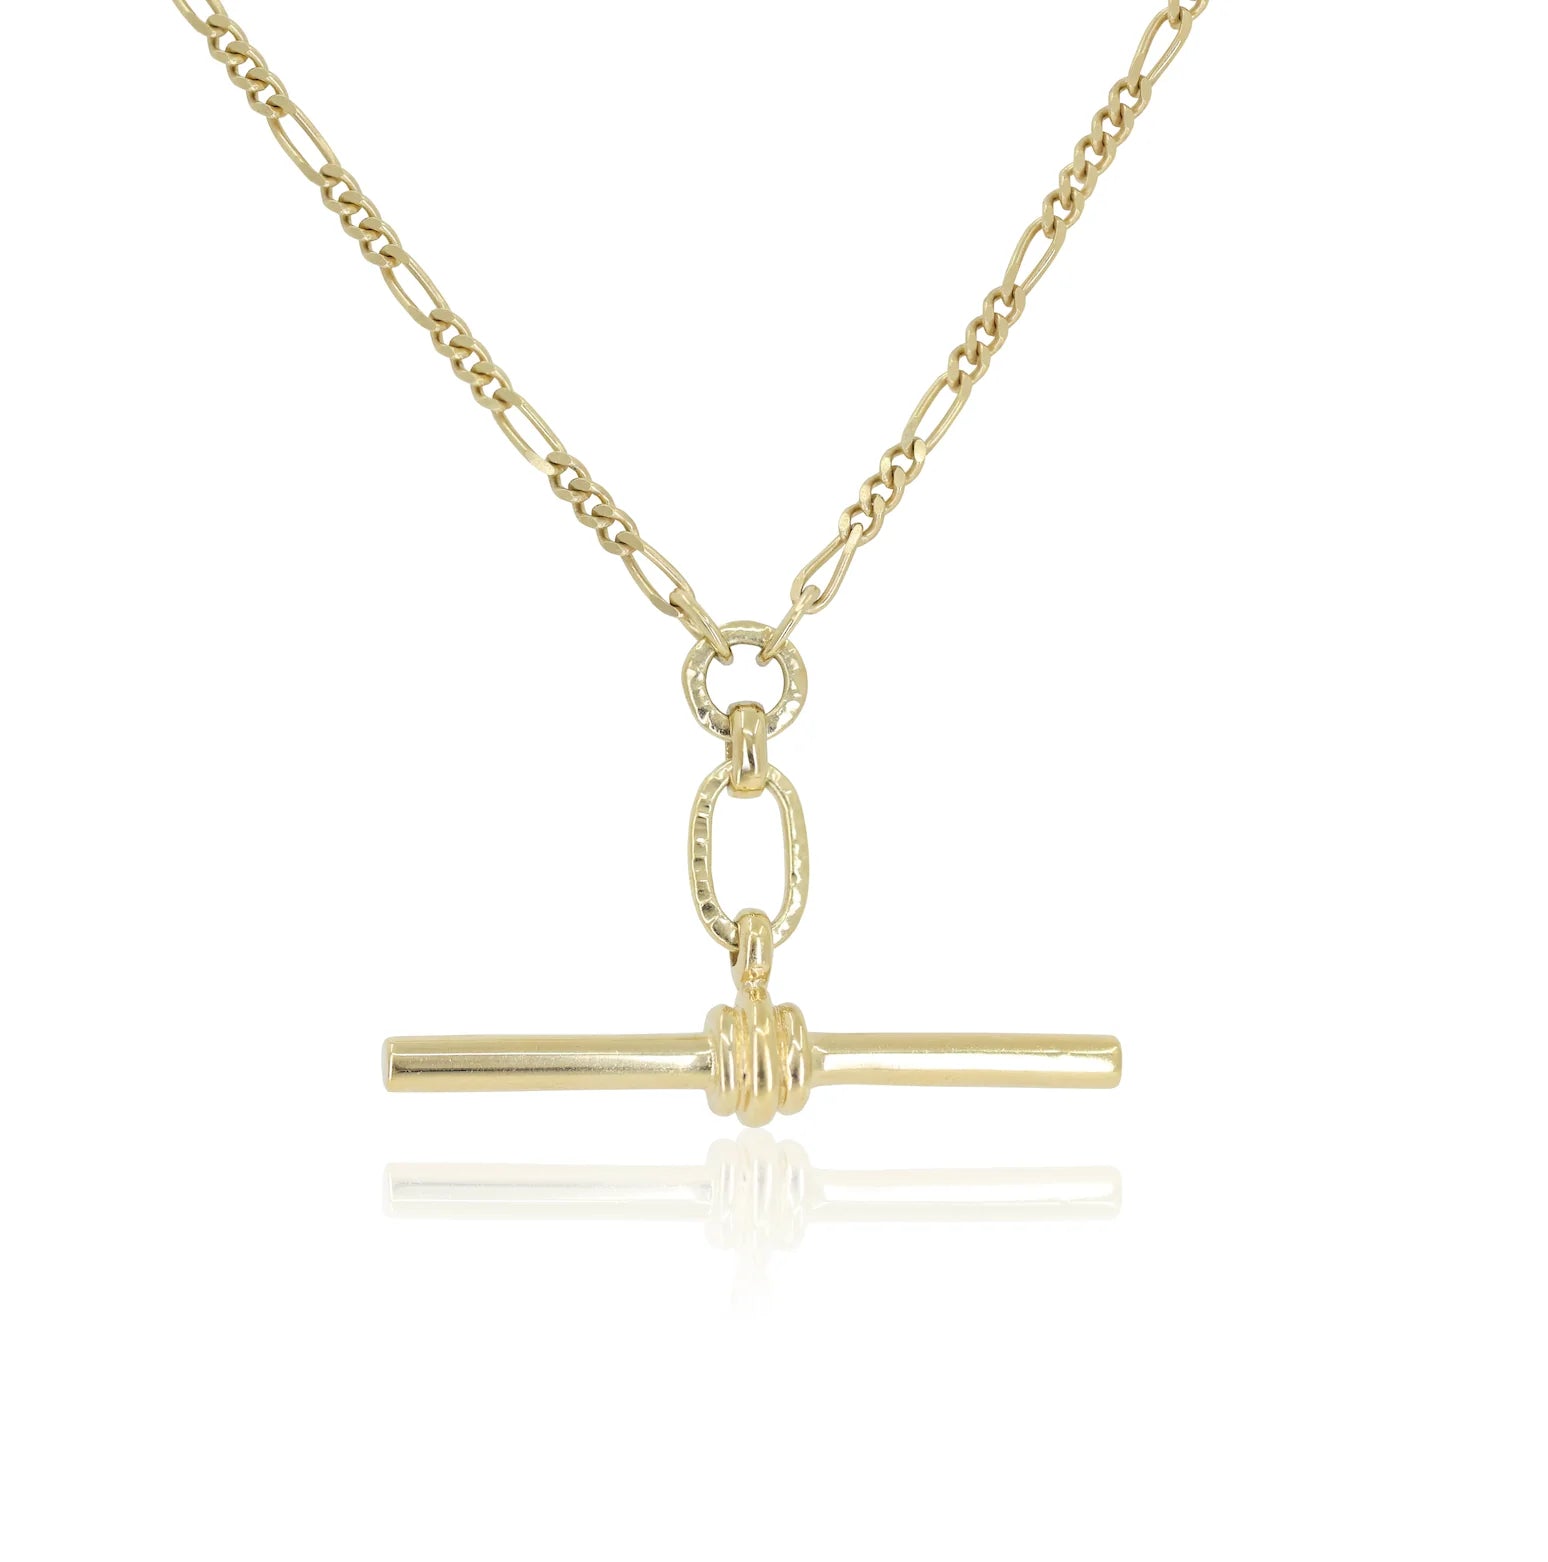 Toni May Fob Gold Necklace